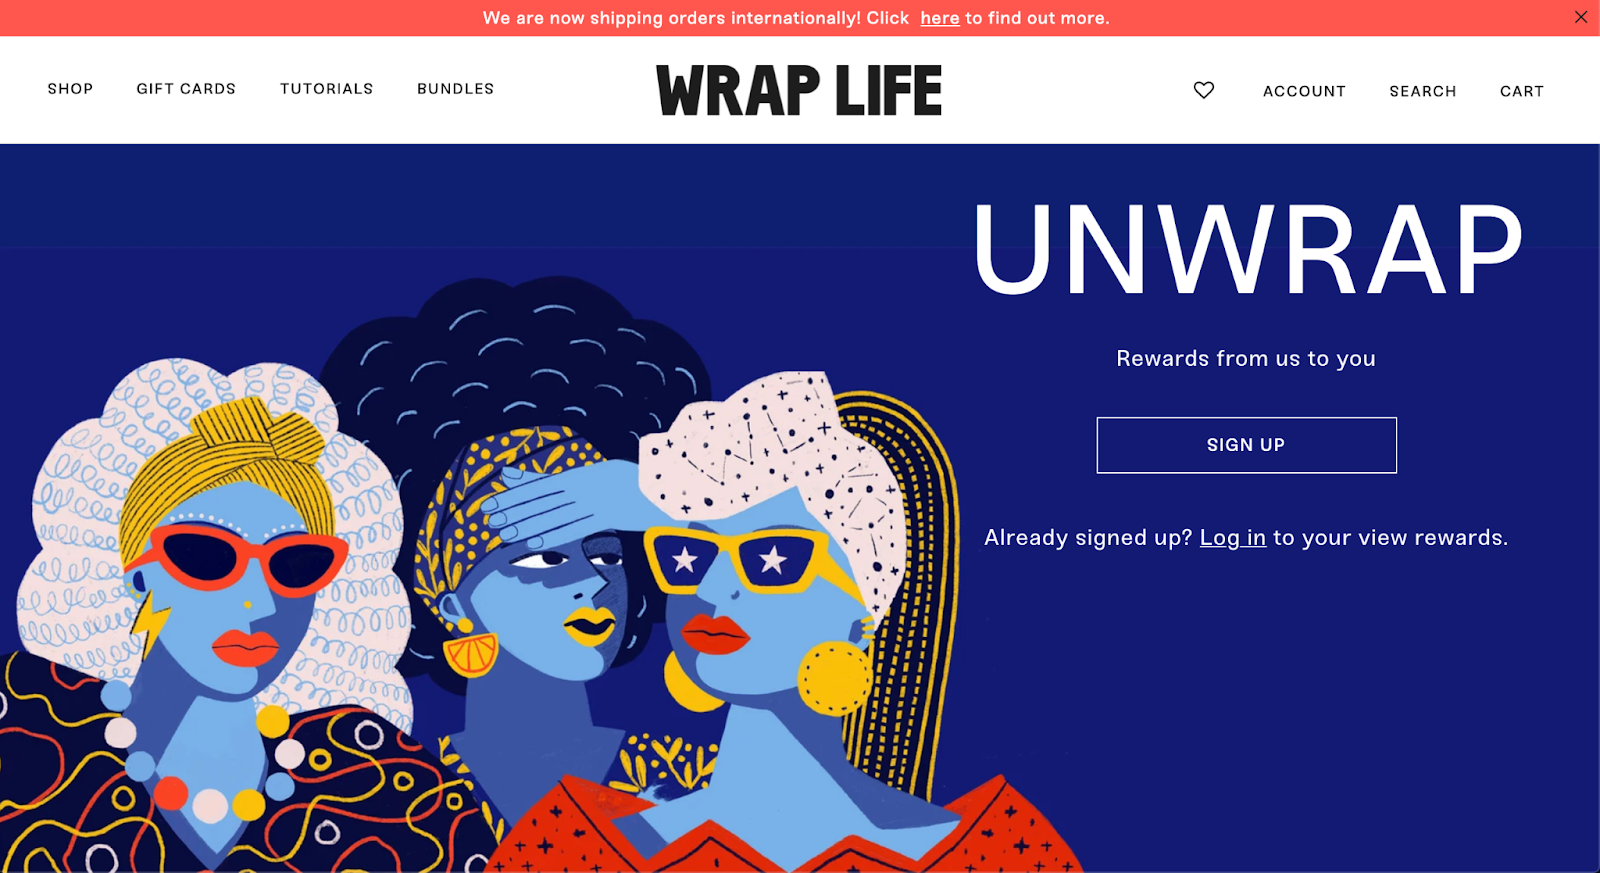 A screenshot of the Unwrap Rewards program explainer page on The Wrap Life’s website. The banner shows 3 animated cartoon characters wearing hair accessories. 